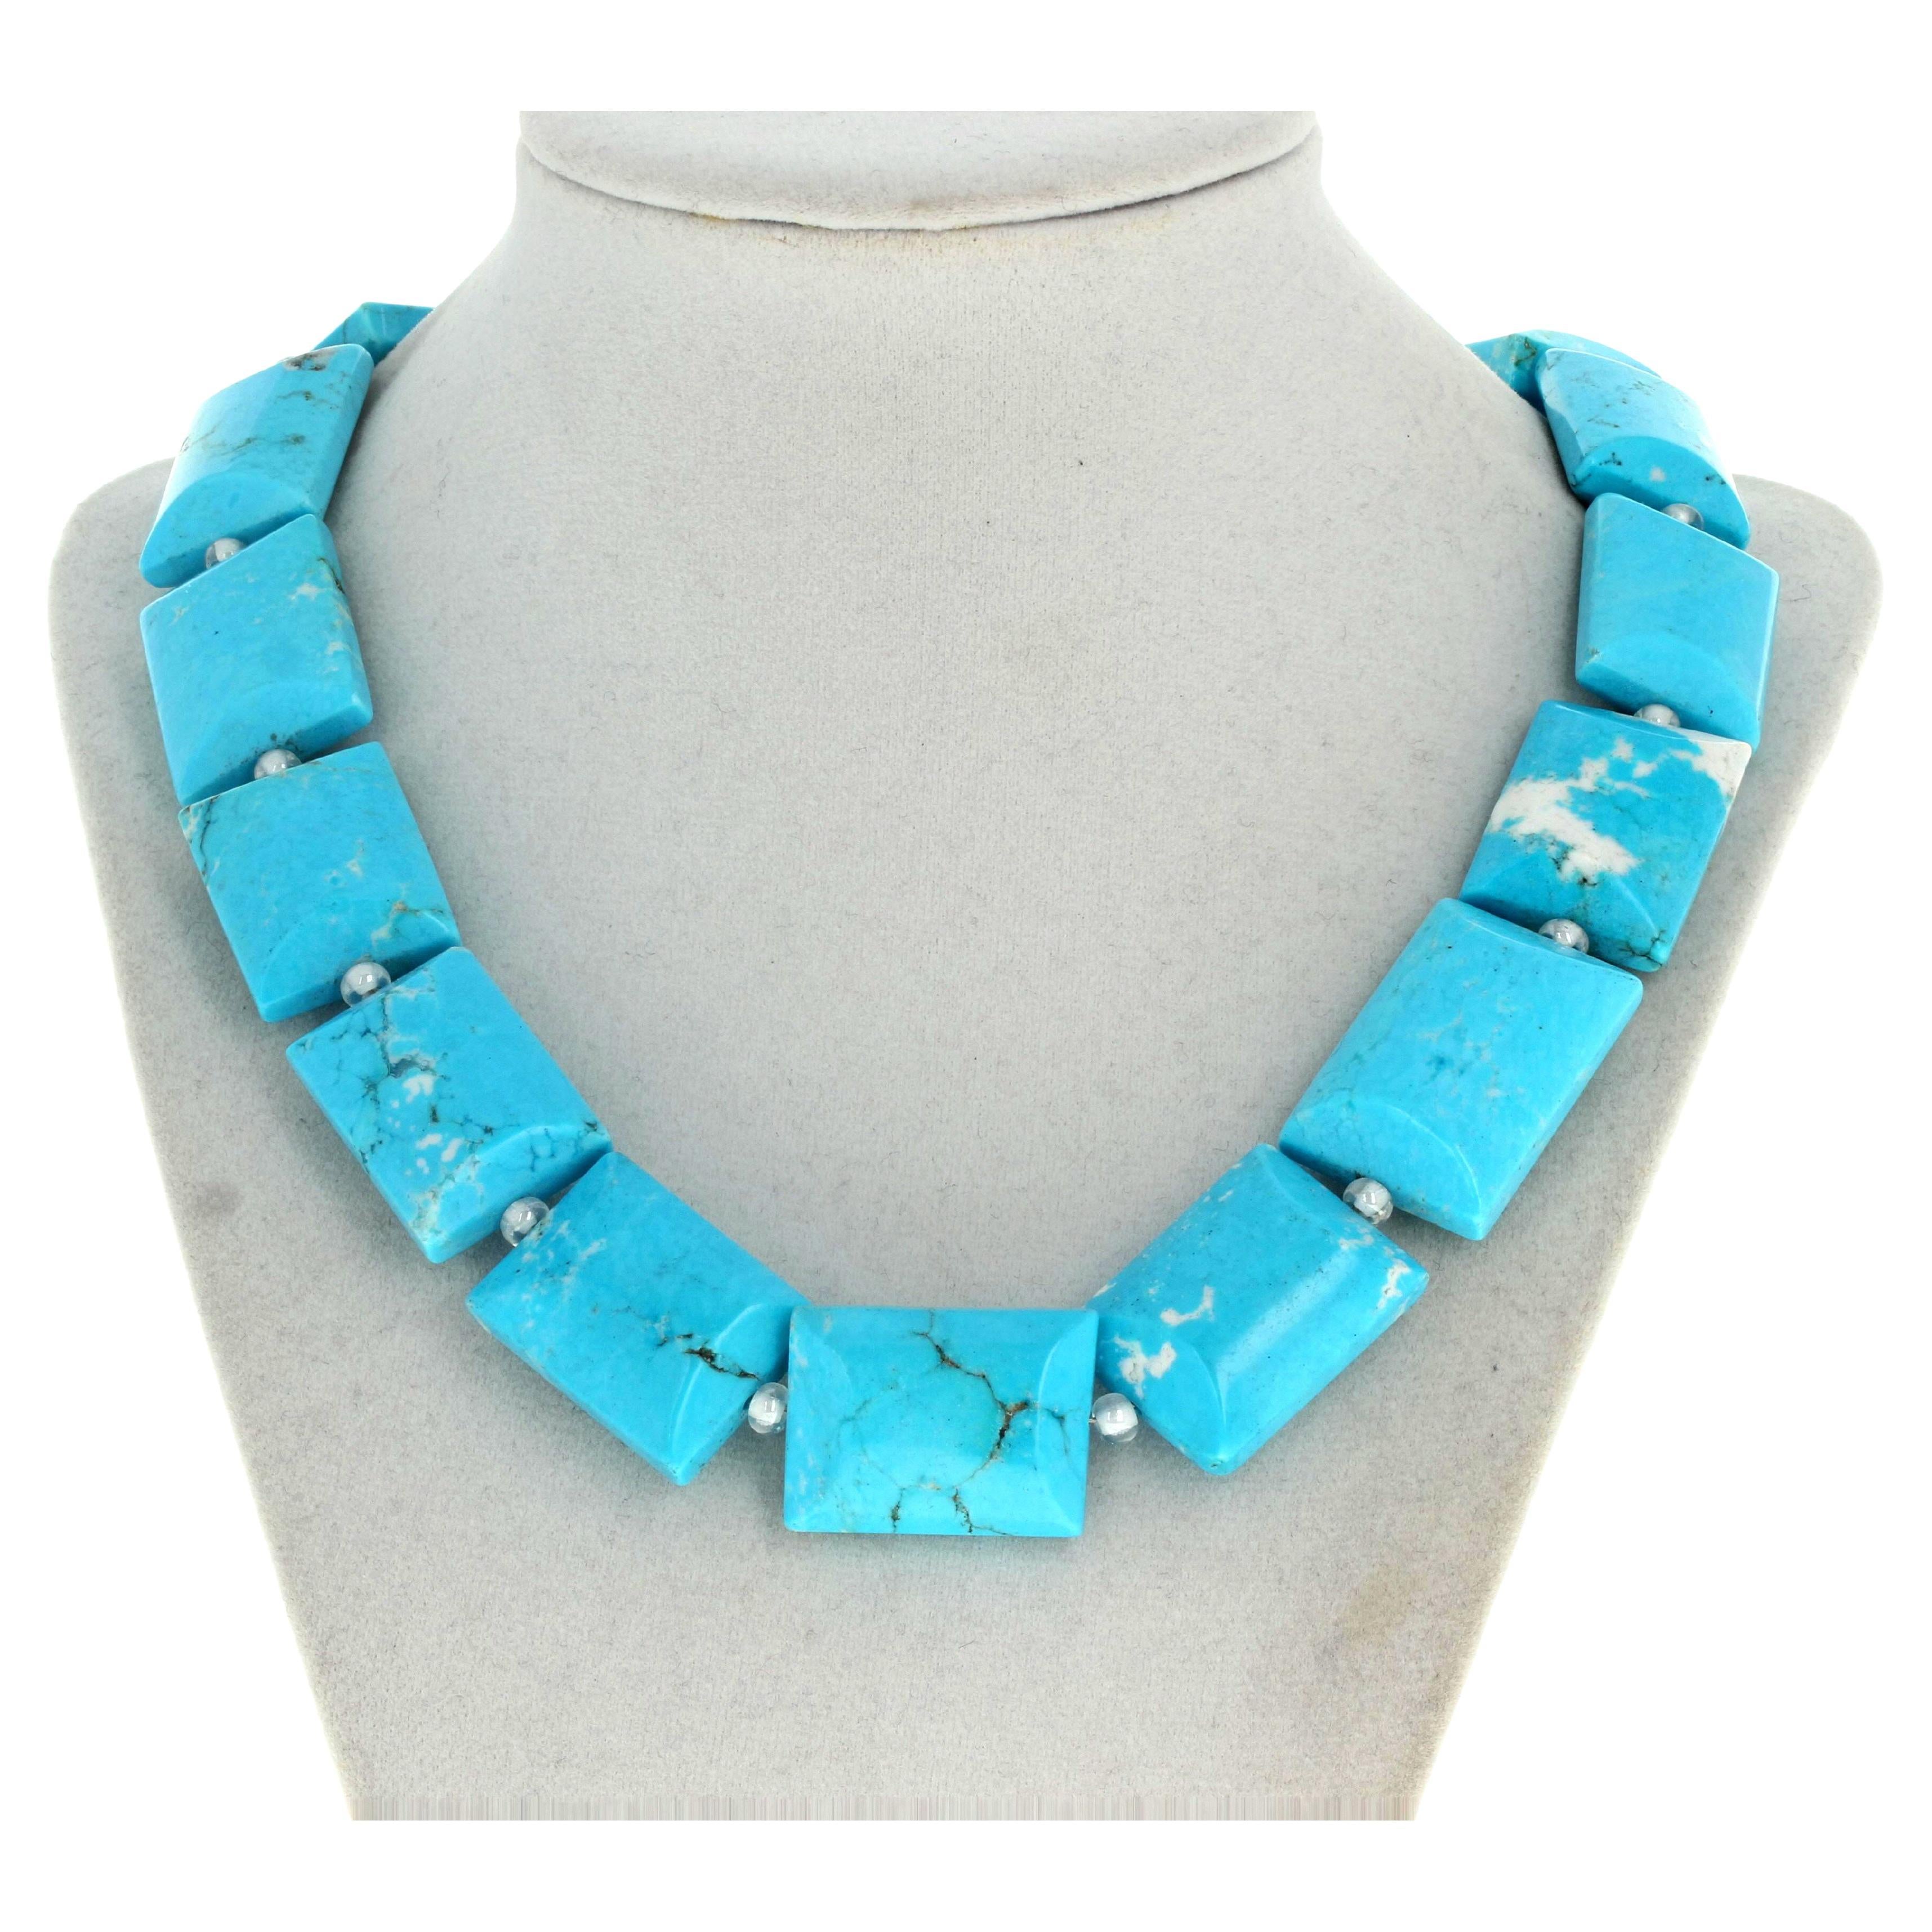 AJD Dramatic Lovely Natural Blue Magnesite 19 1/2" Long Statement Necklace